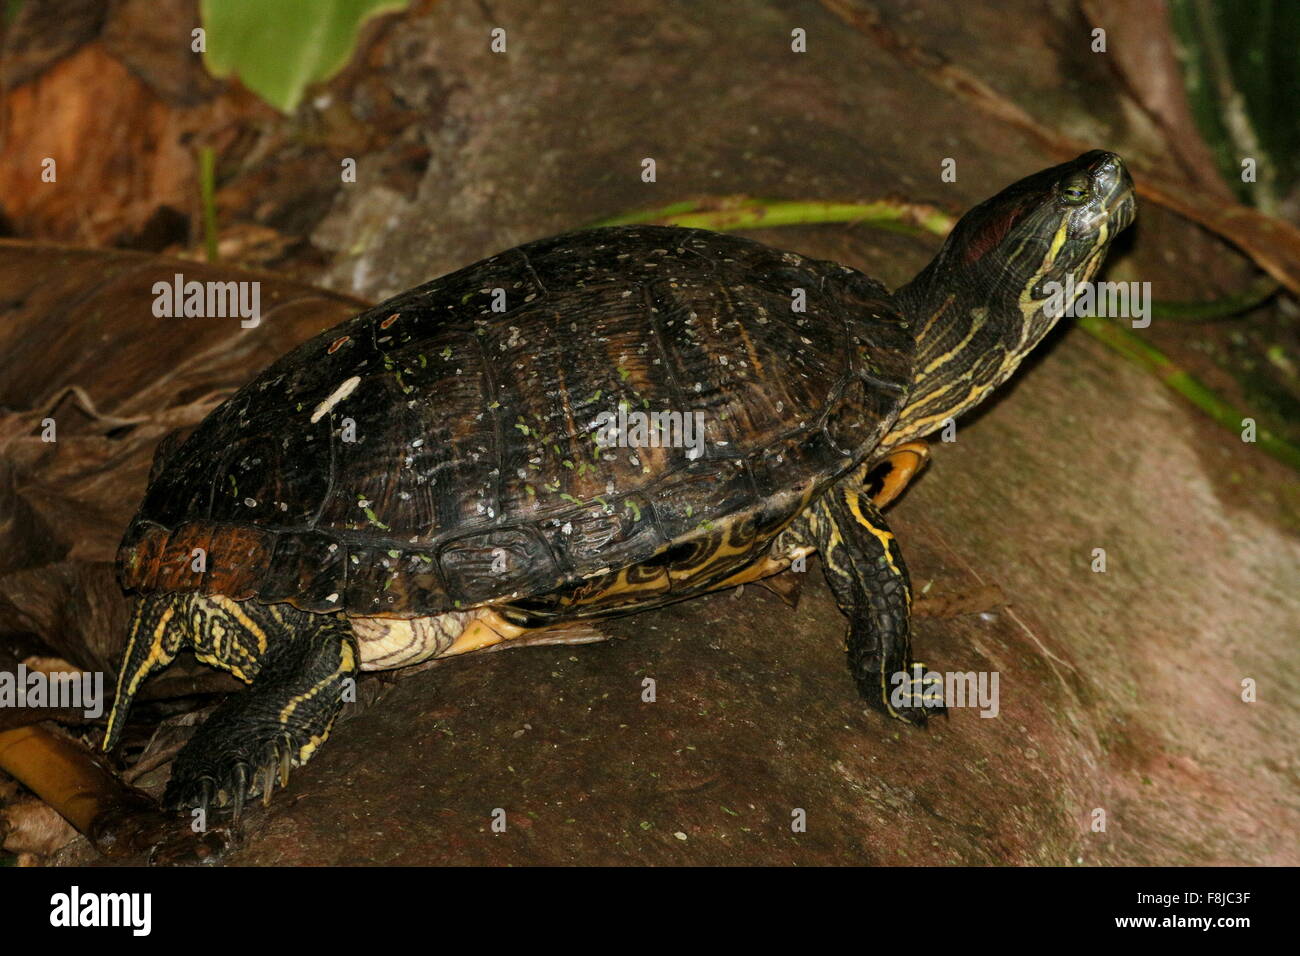 Red-eared slider turtle or Red eared terrapin (Trachemys scripta elegans), native to Florida & the Southeastern, United States Stock Photo